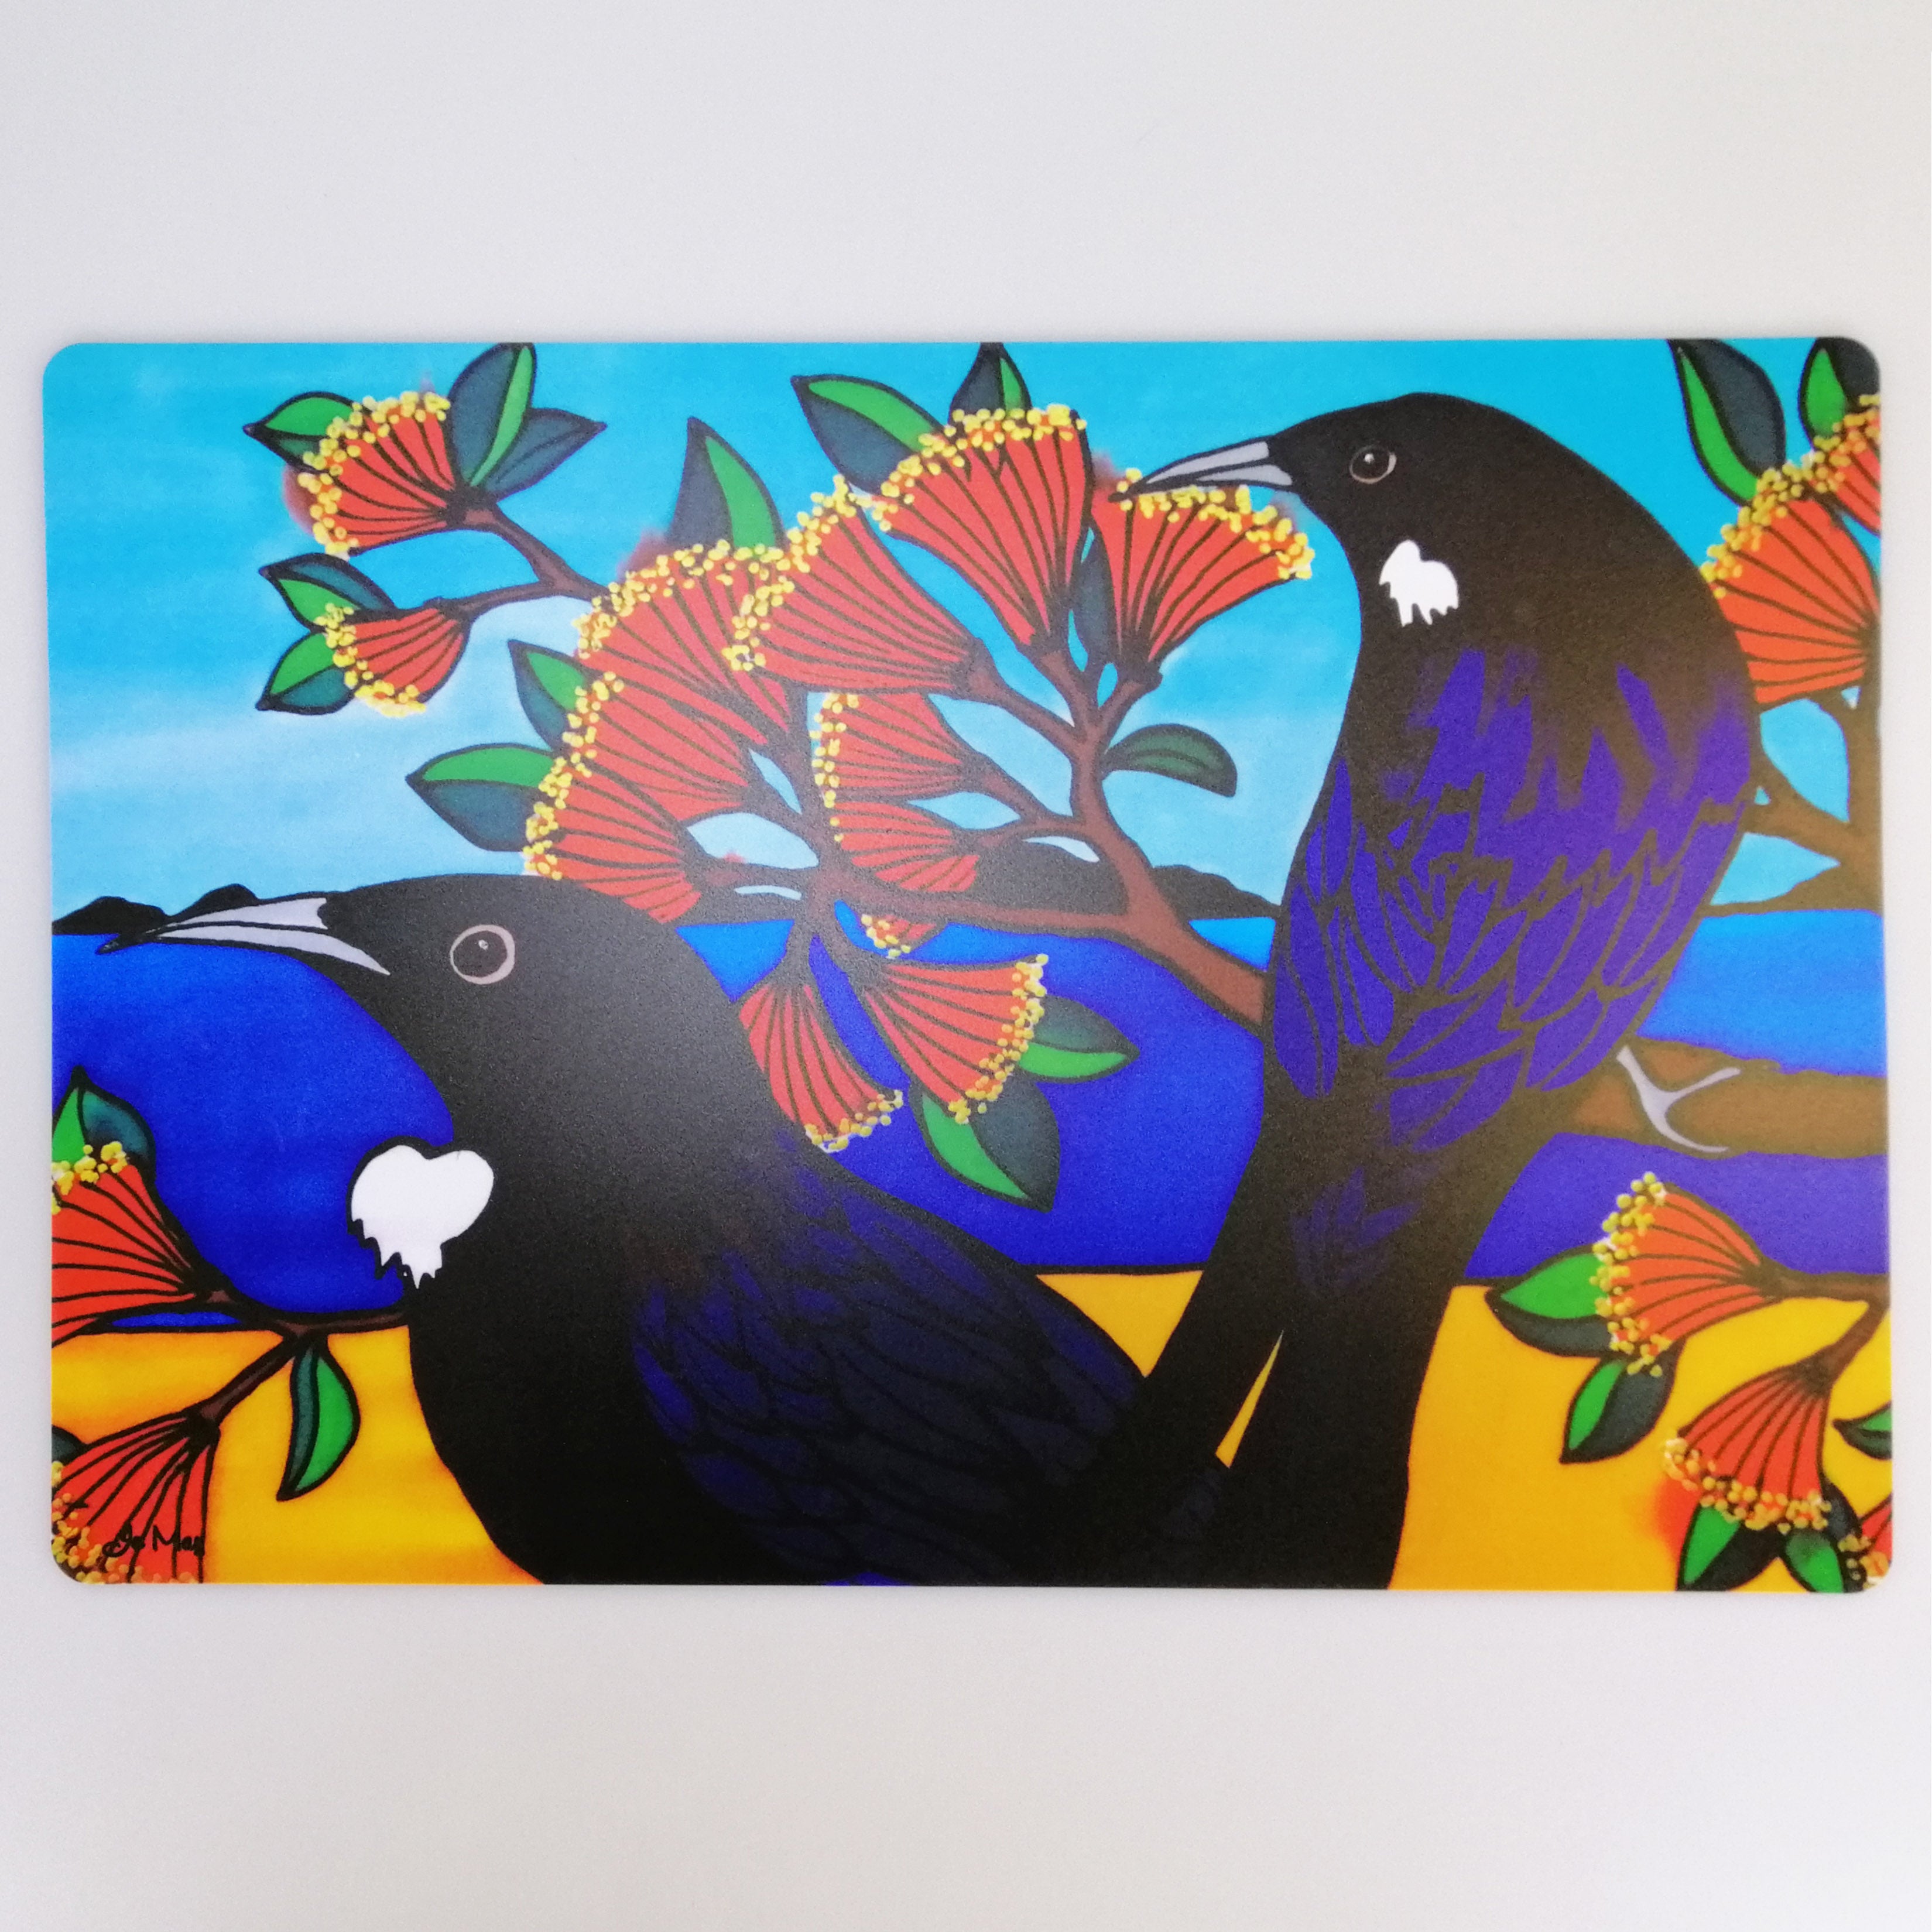 Plastic Placemats - Jo May Birds - Set of 4